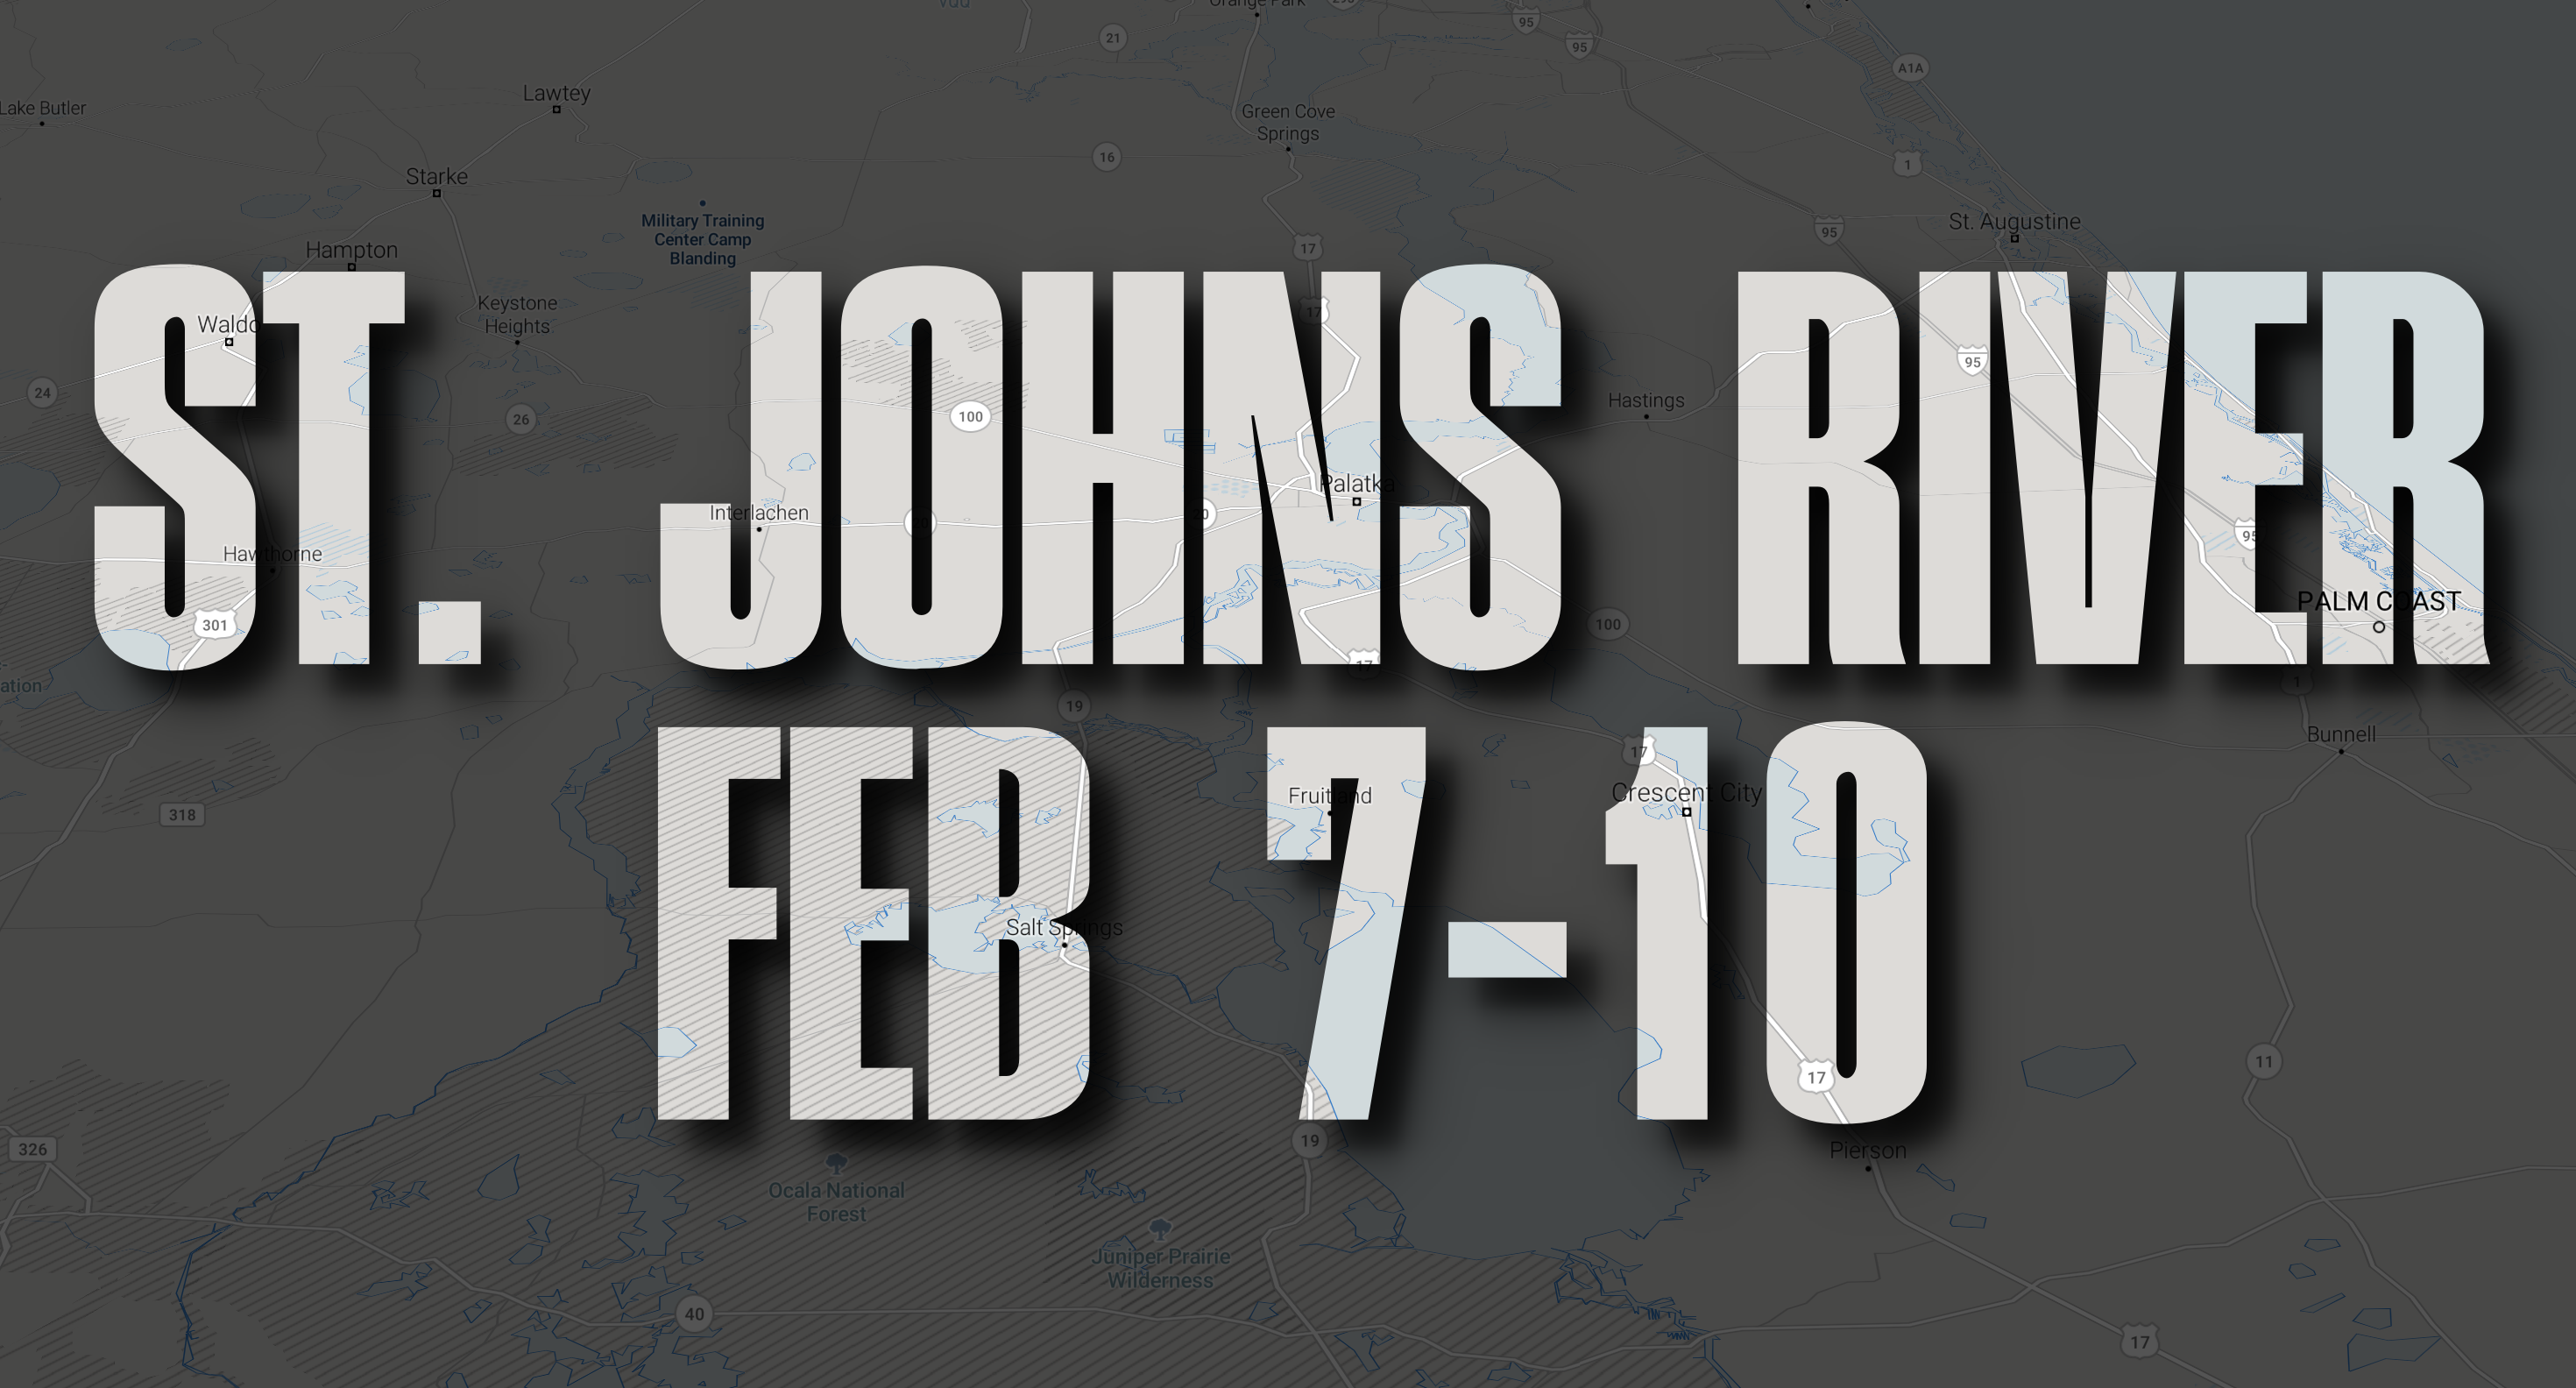 The first stop is yet another return trip to the St. Johns River out of Palatka, Fla., and it takes place Feb. 7-10, which is the earliest date for an Elite opener. 